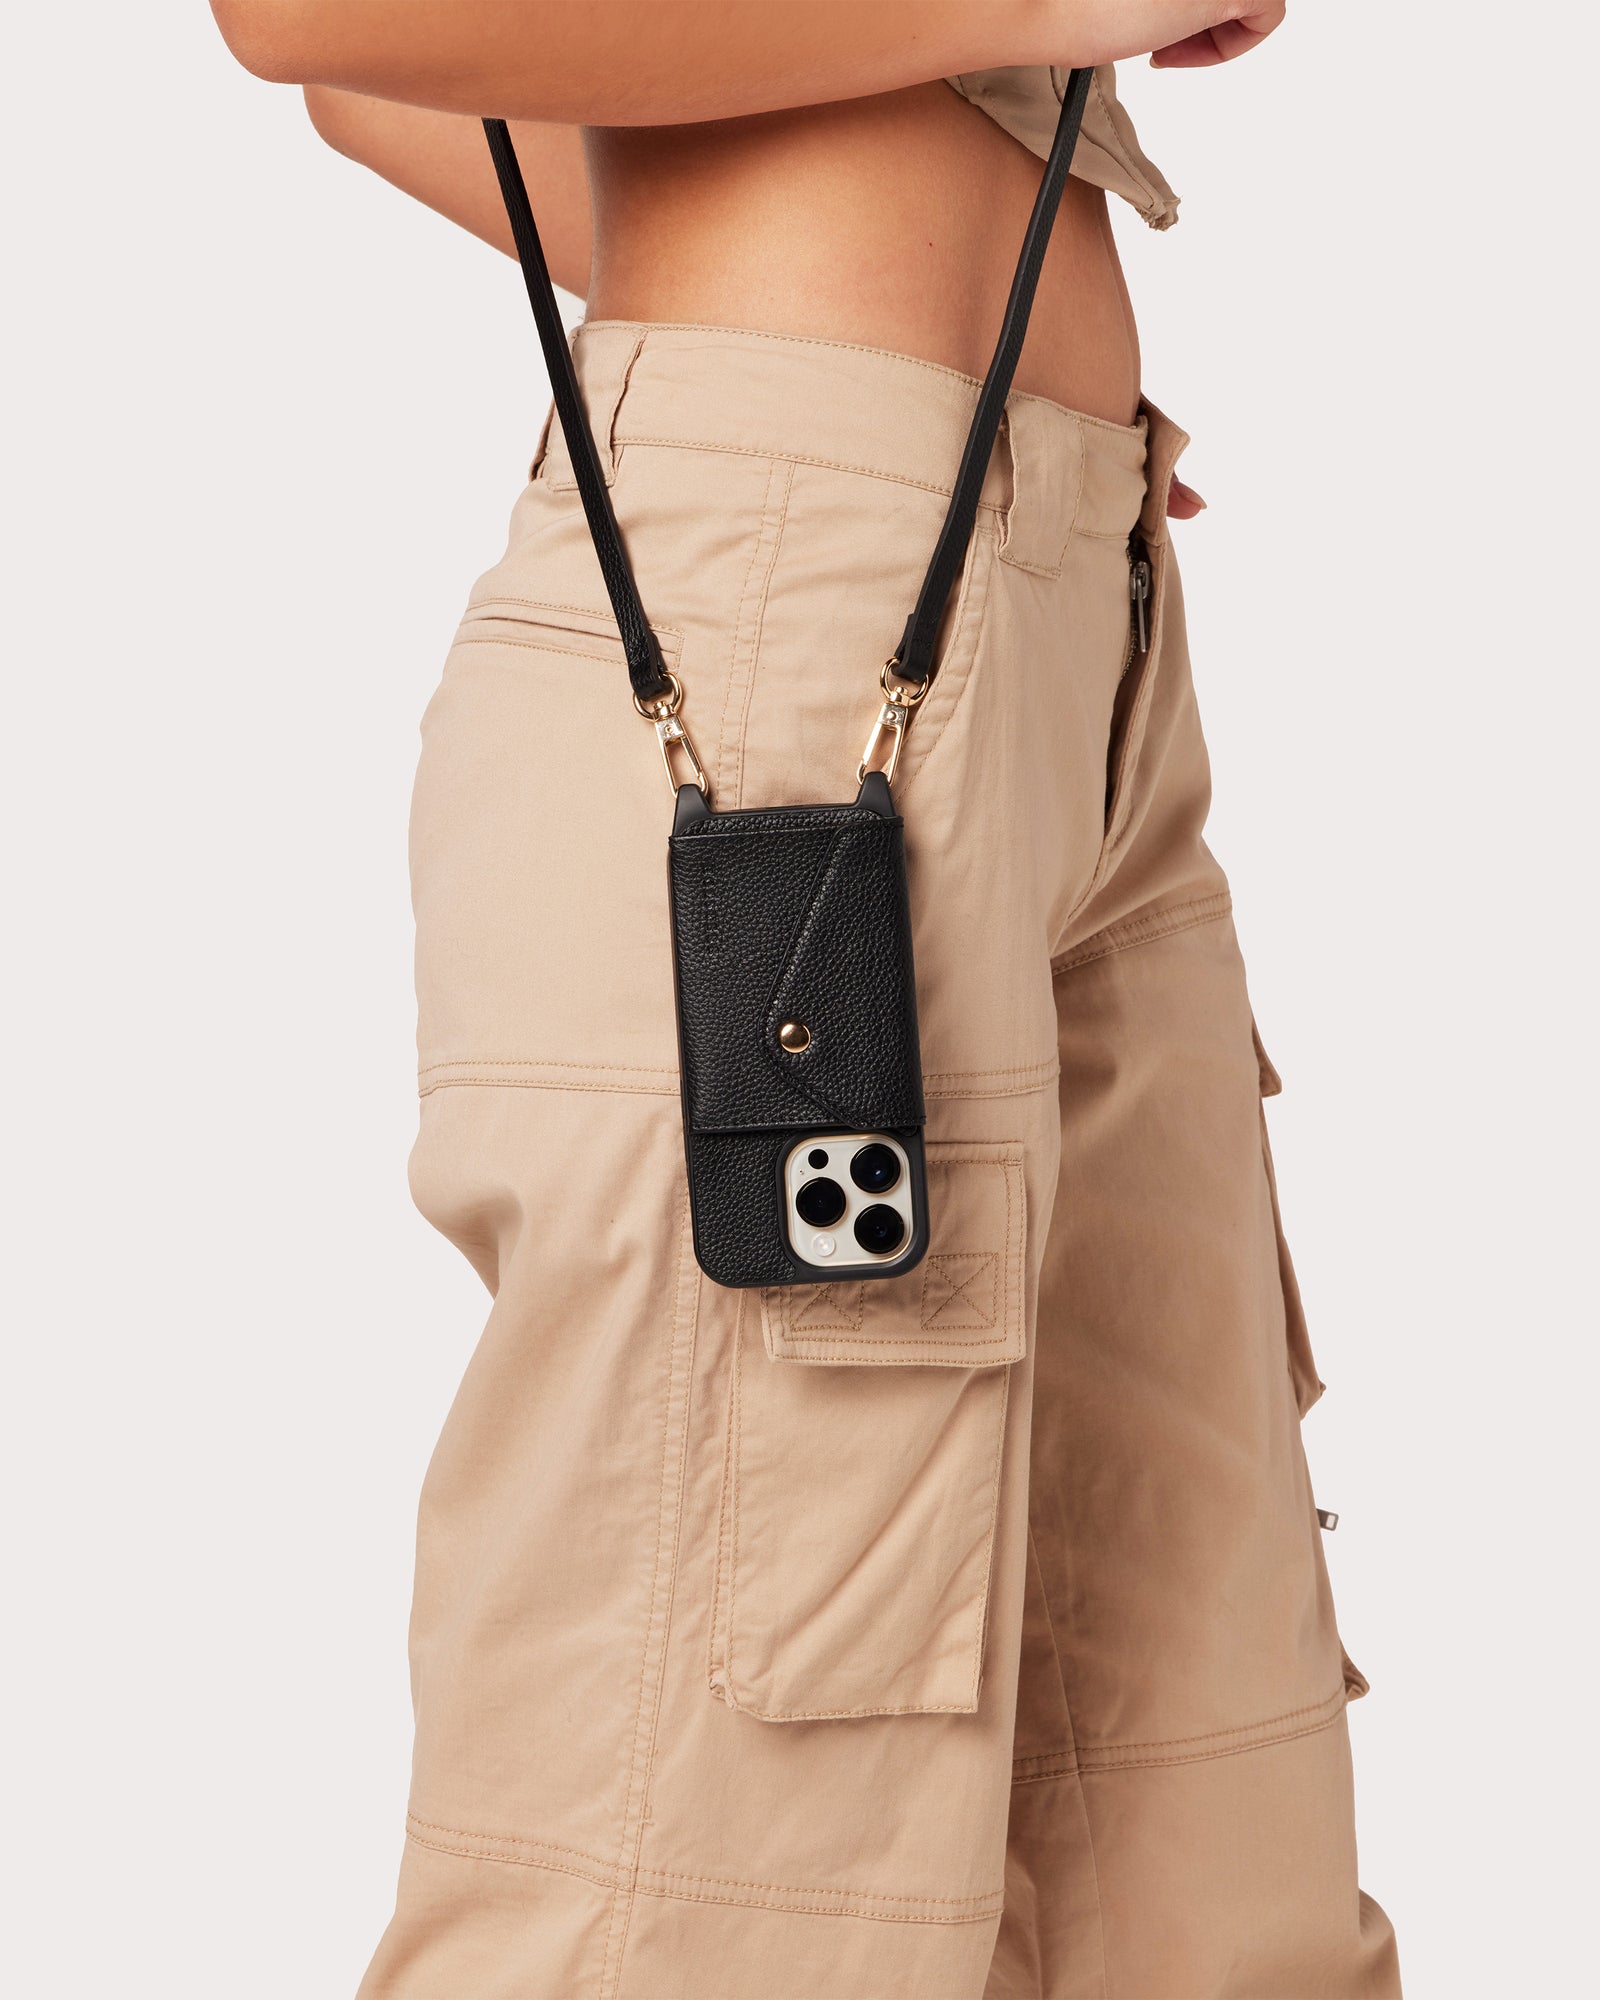 Short Crossbody Straps - A Trendy/Fashionable New Way to Carry